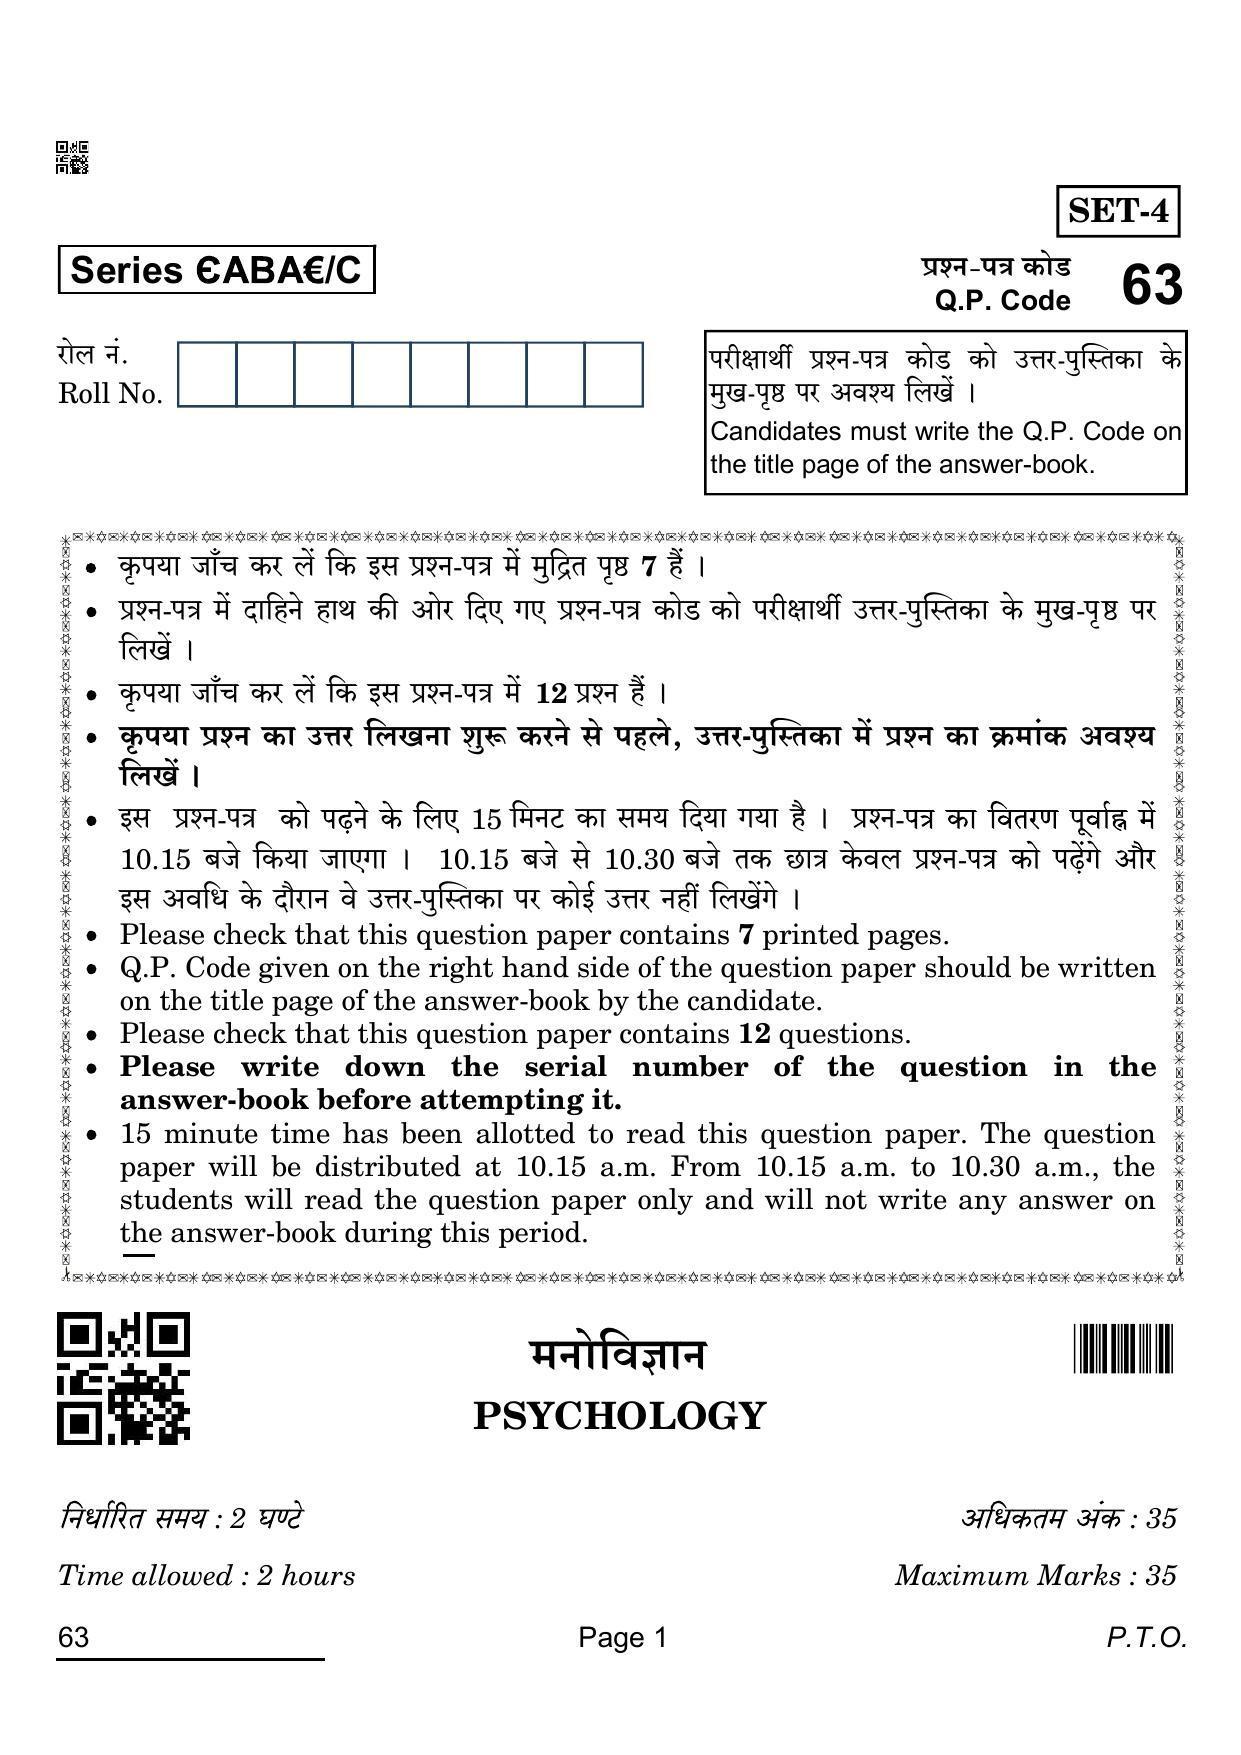 CBSE Class 12 63 Psychology 2022 Compartment Question Paper - Page 1